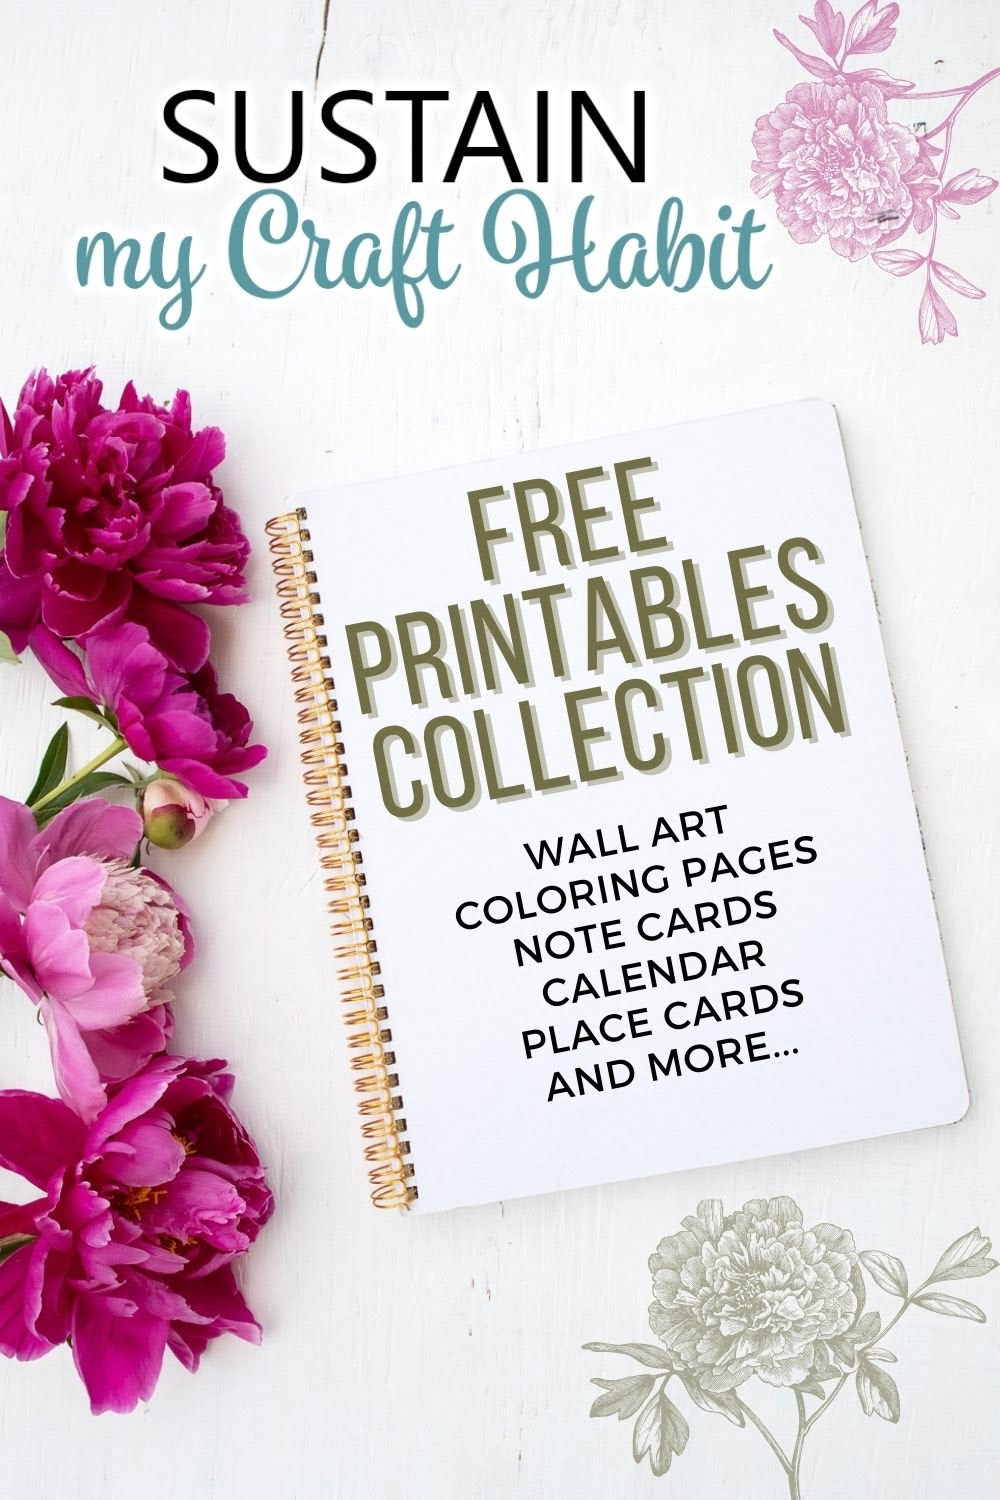 FREE PRINTABLES Archives Sustain My Craft Habit